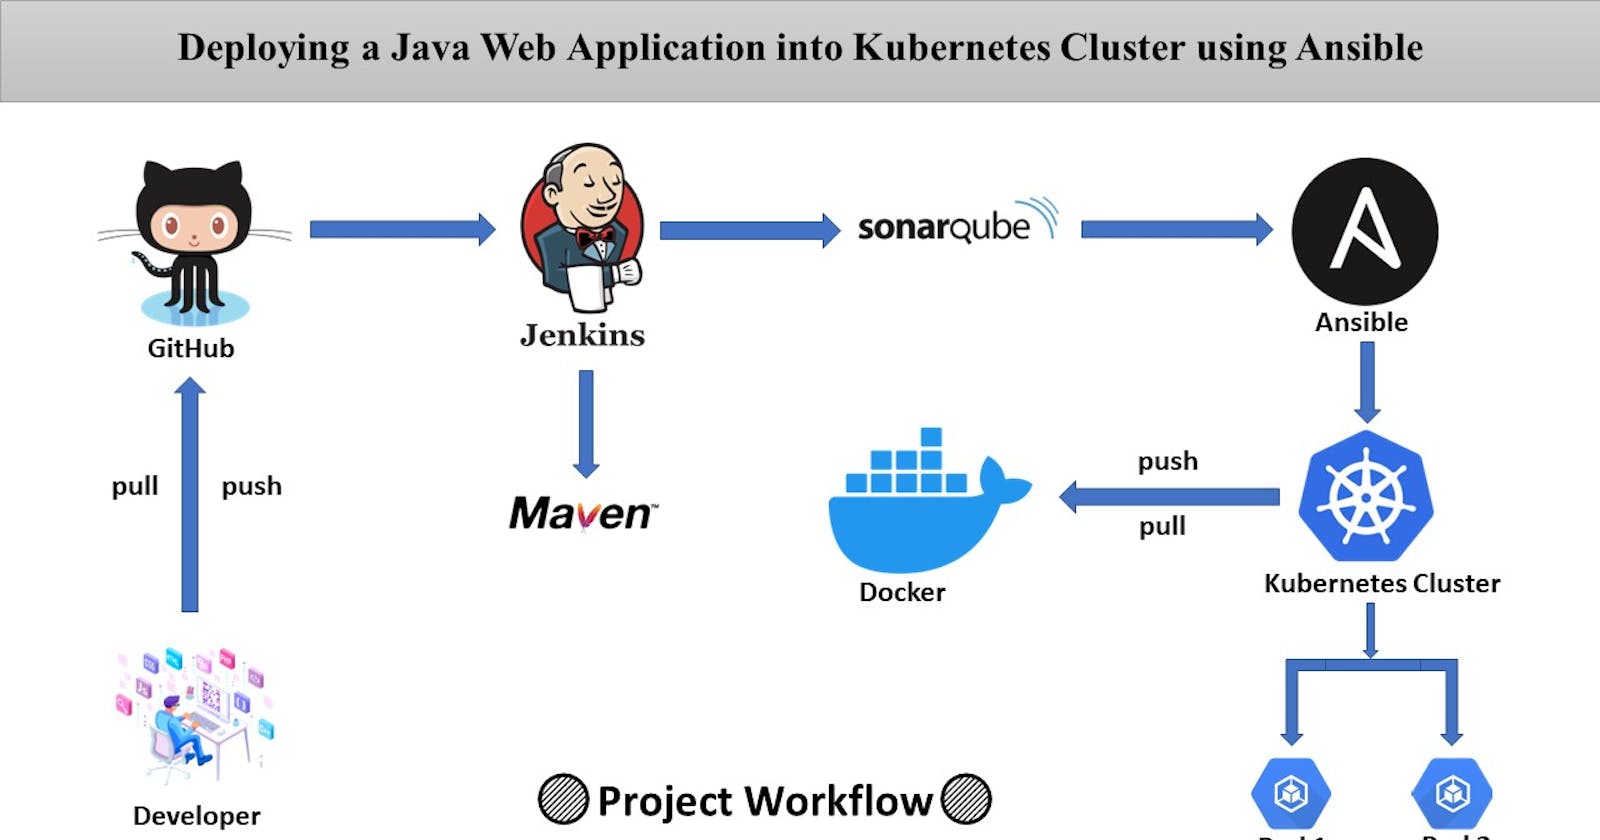 Deploying a Java Web Application into Kubernetes Cluster using Ansible.